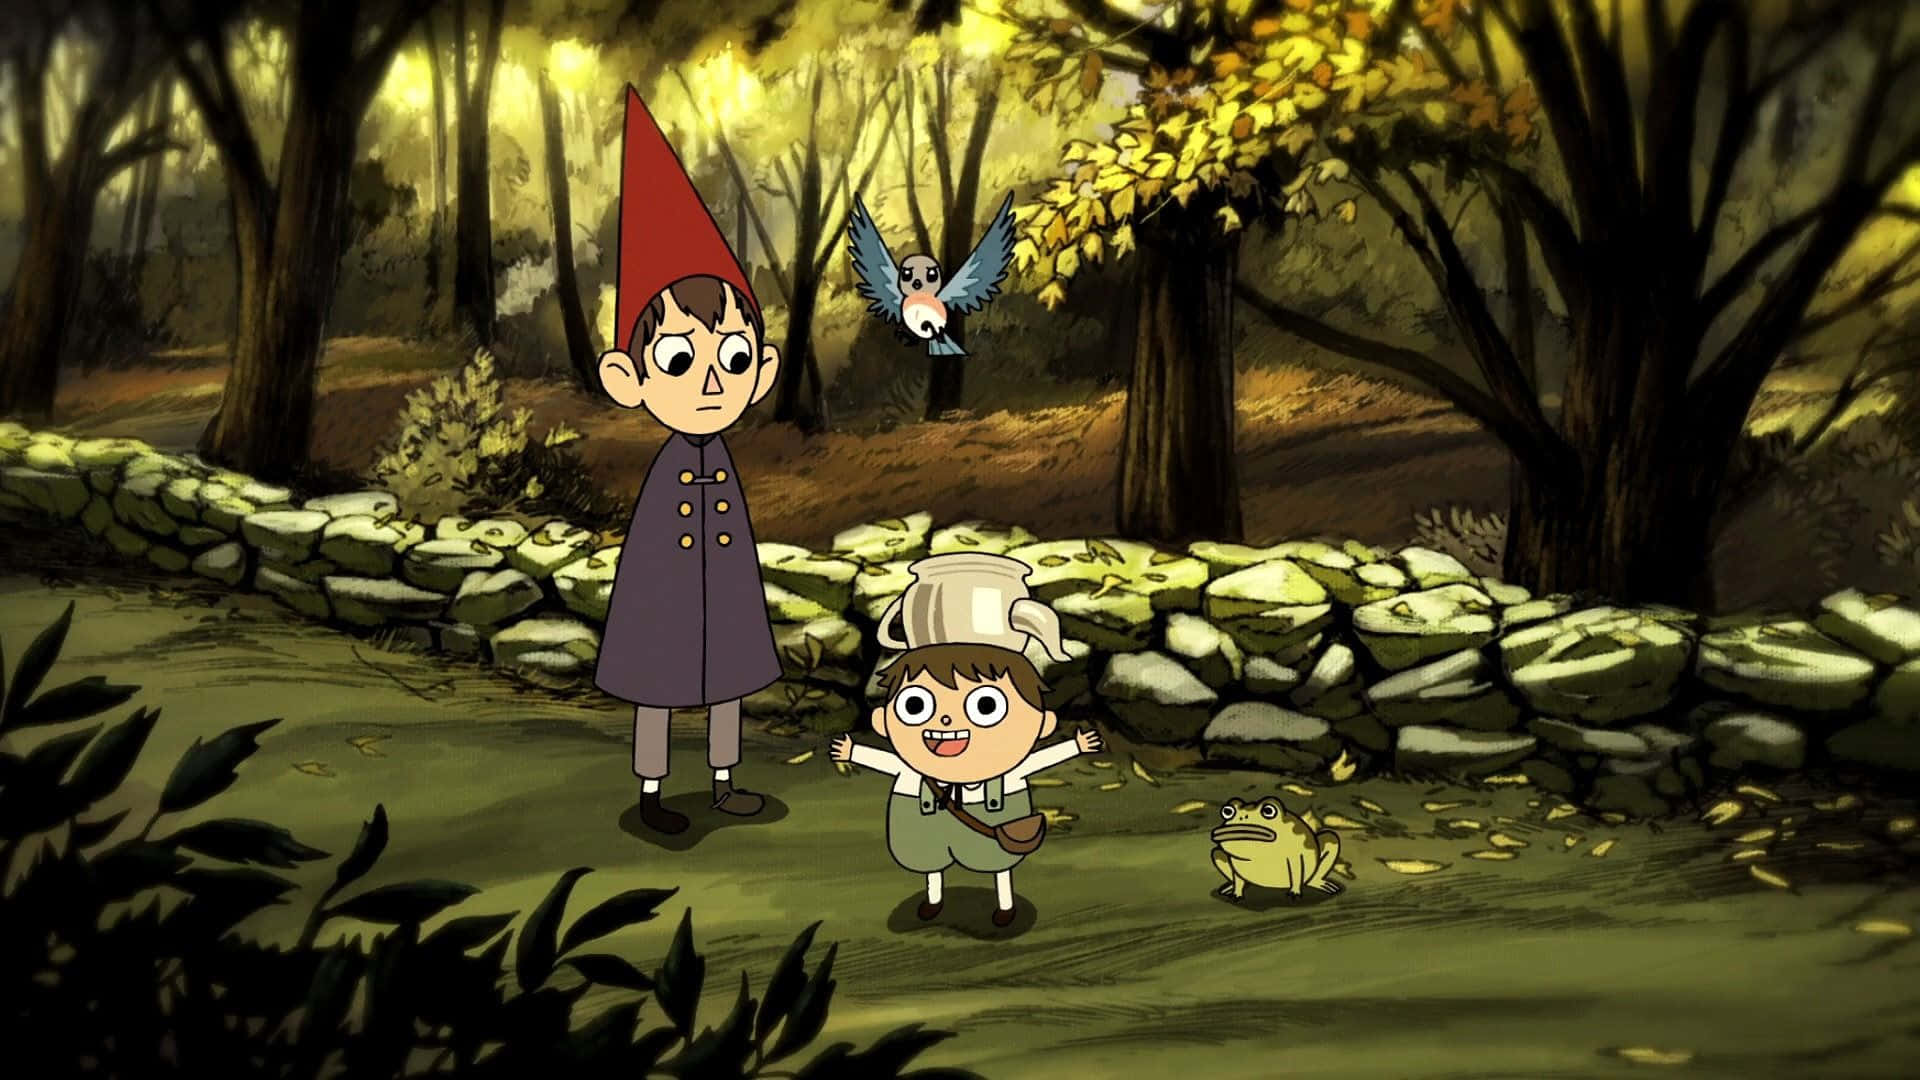 Over the Garden Wall Wallpaper 83 images